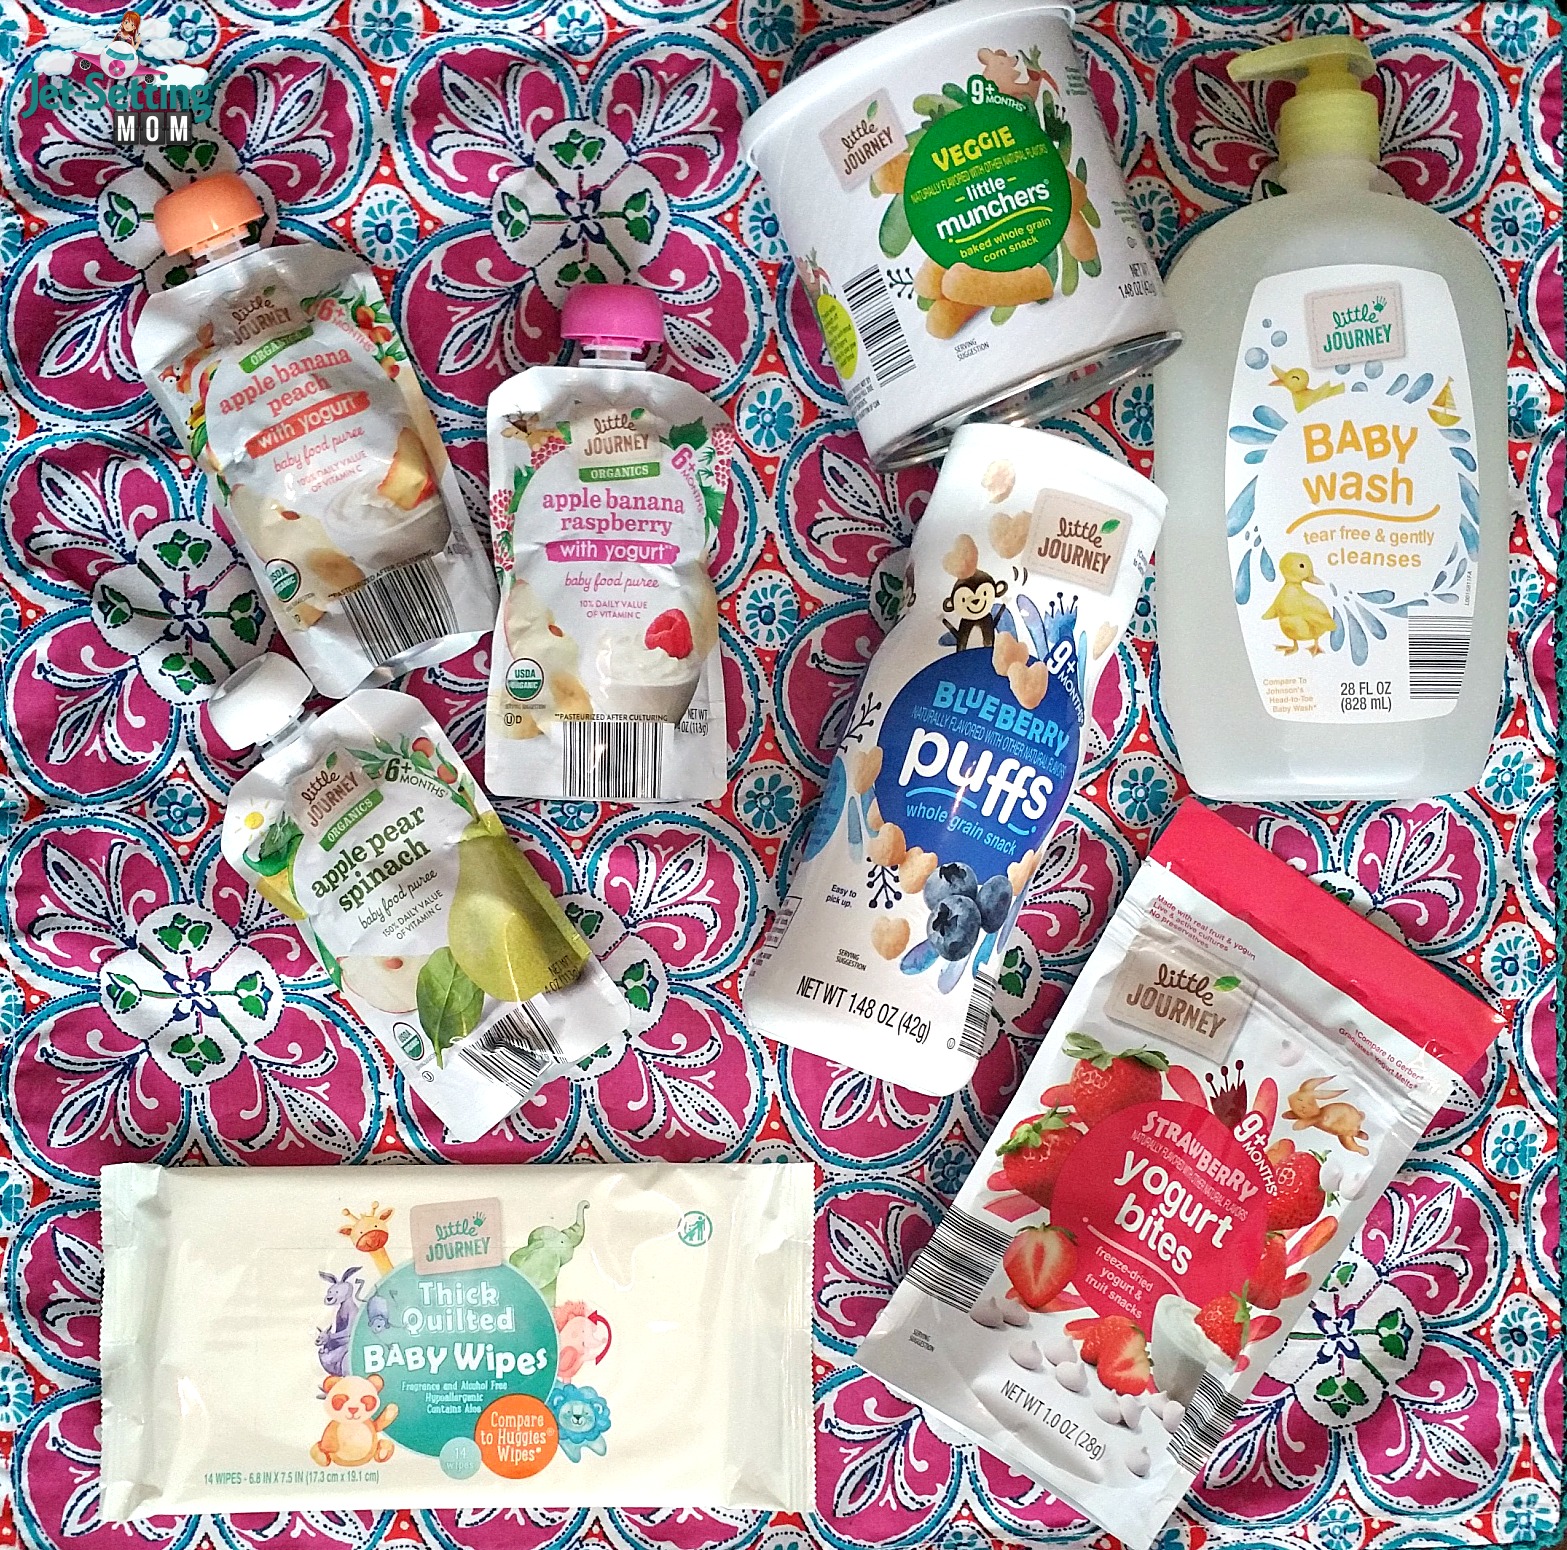 #ALDIlittlejourney products are my toddler's favorite! #ad